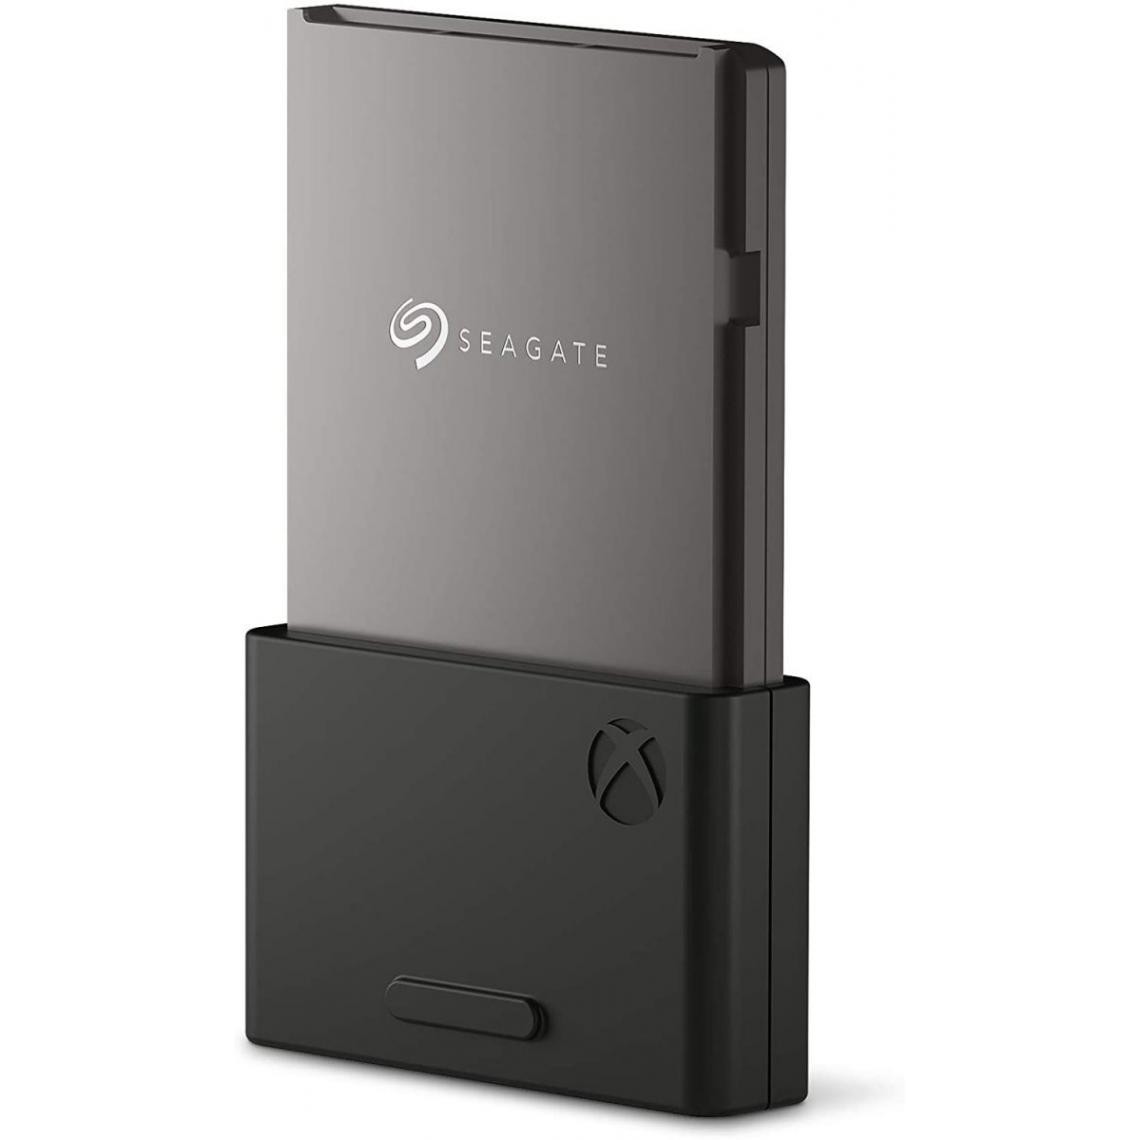 Seagate - Stockage Expansion Card pour Xbox Series X/S - 1 To SSD - SSD Interne